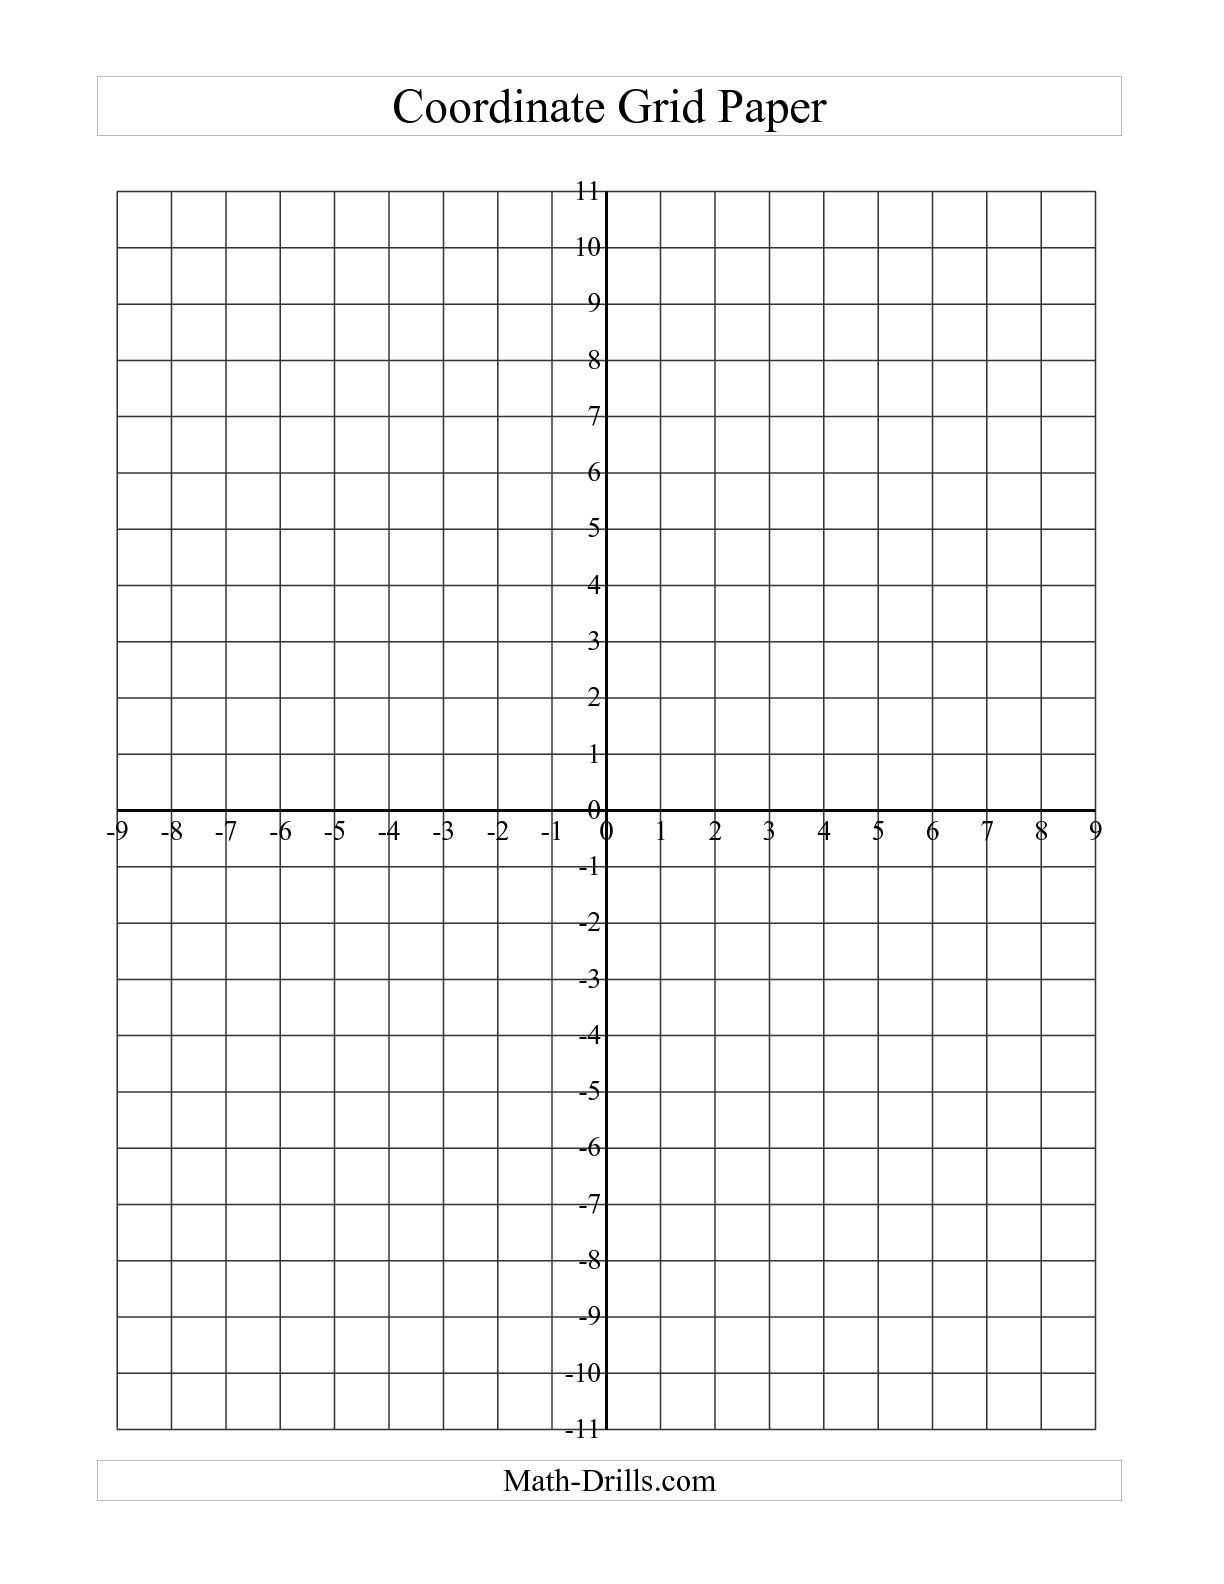 Elementary Teacher Worksheets Also the Coordinate Grid Paper A Math Worksheet From the Graph Paper